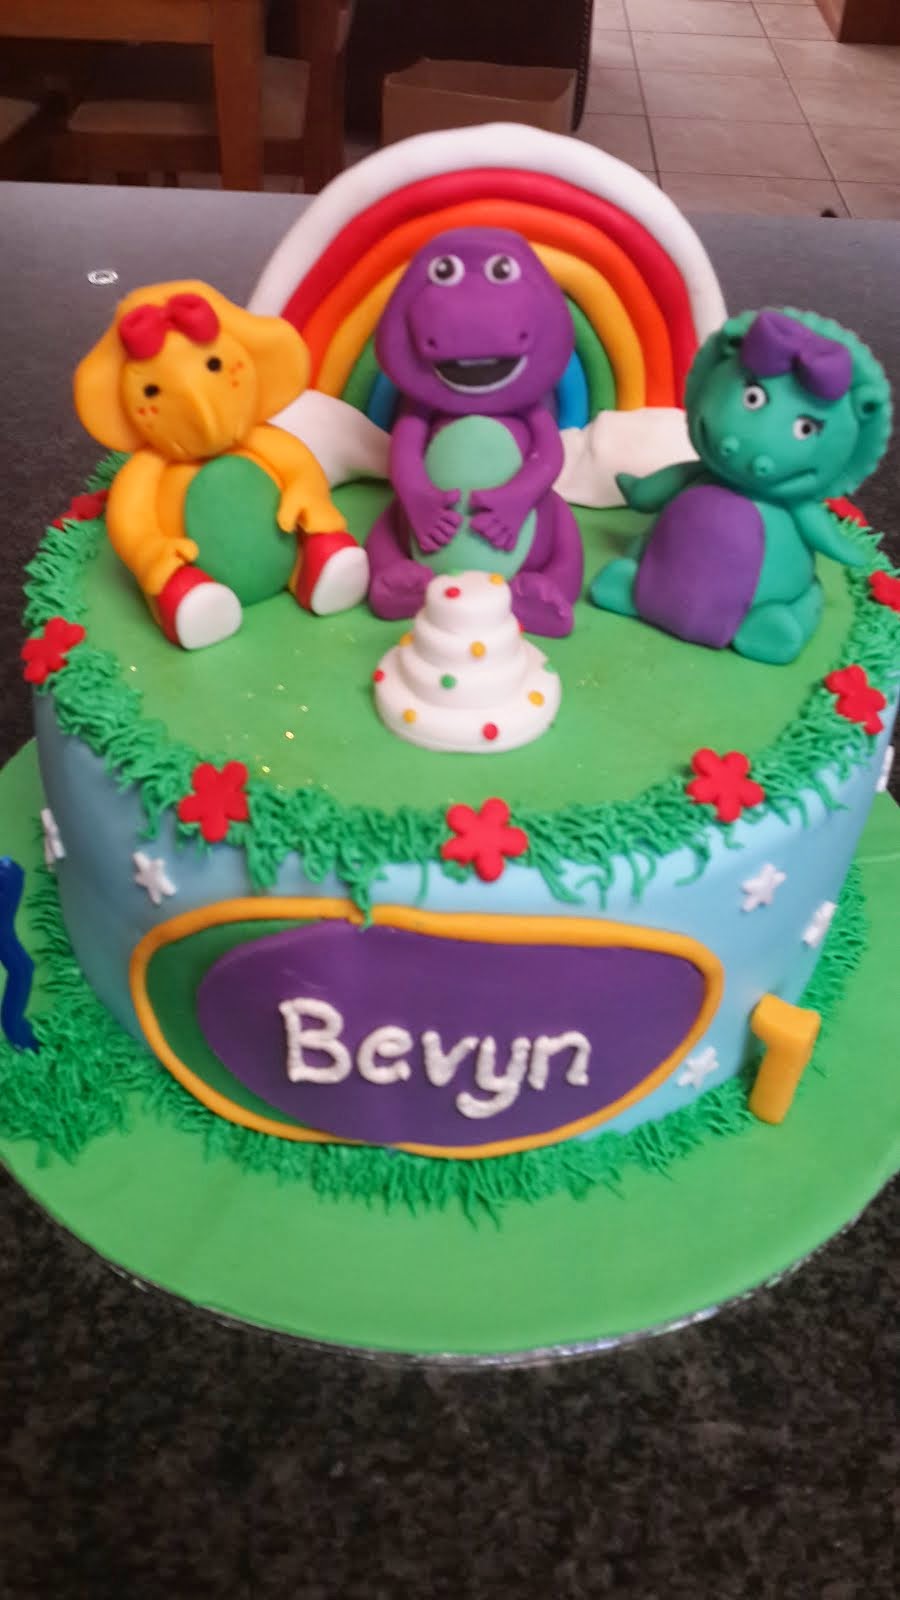 Barney and Friends cake